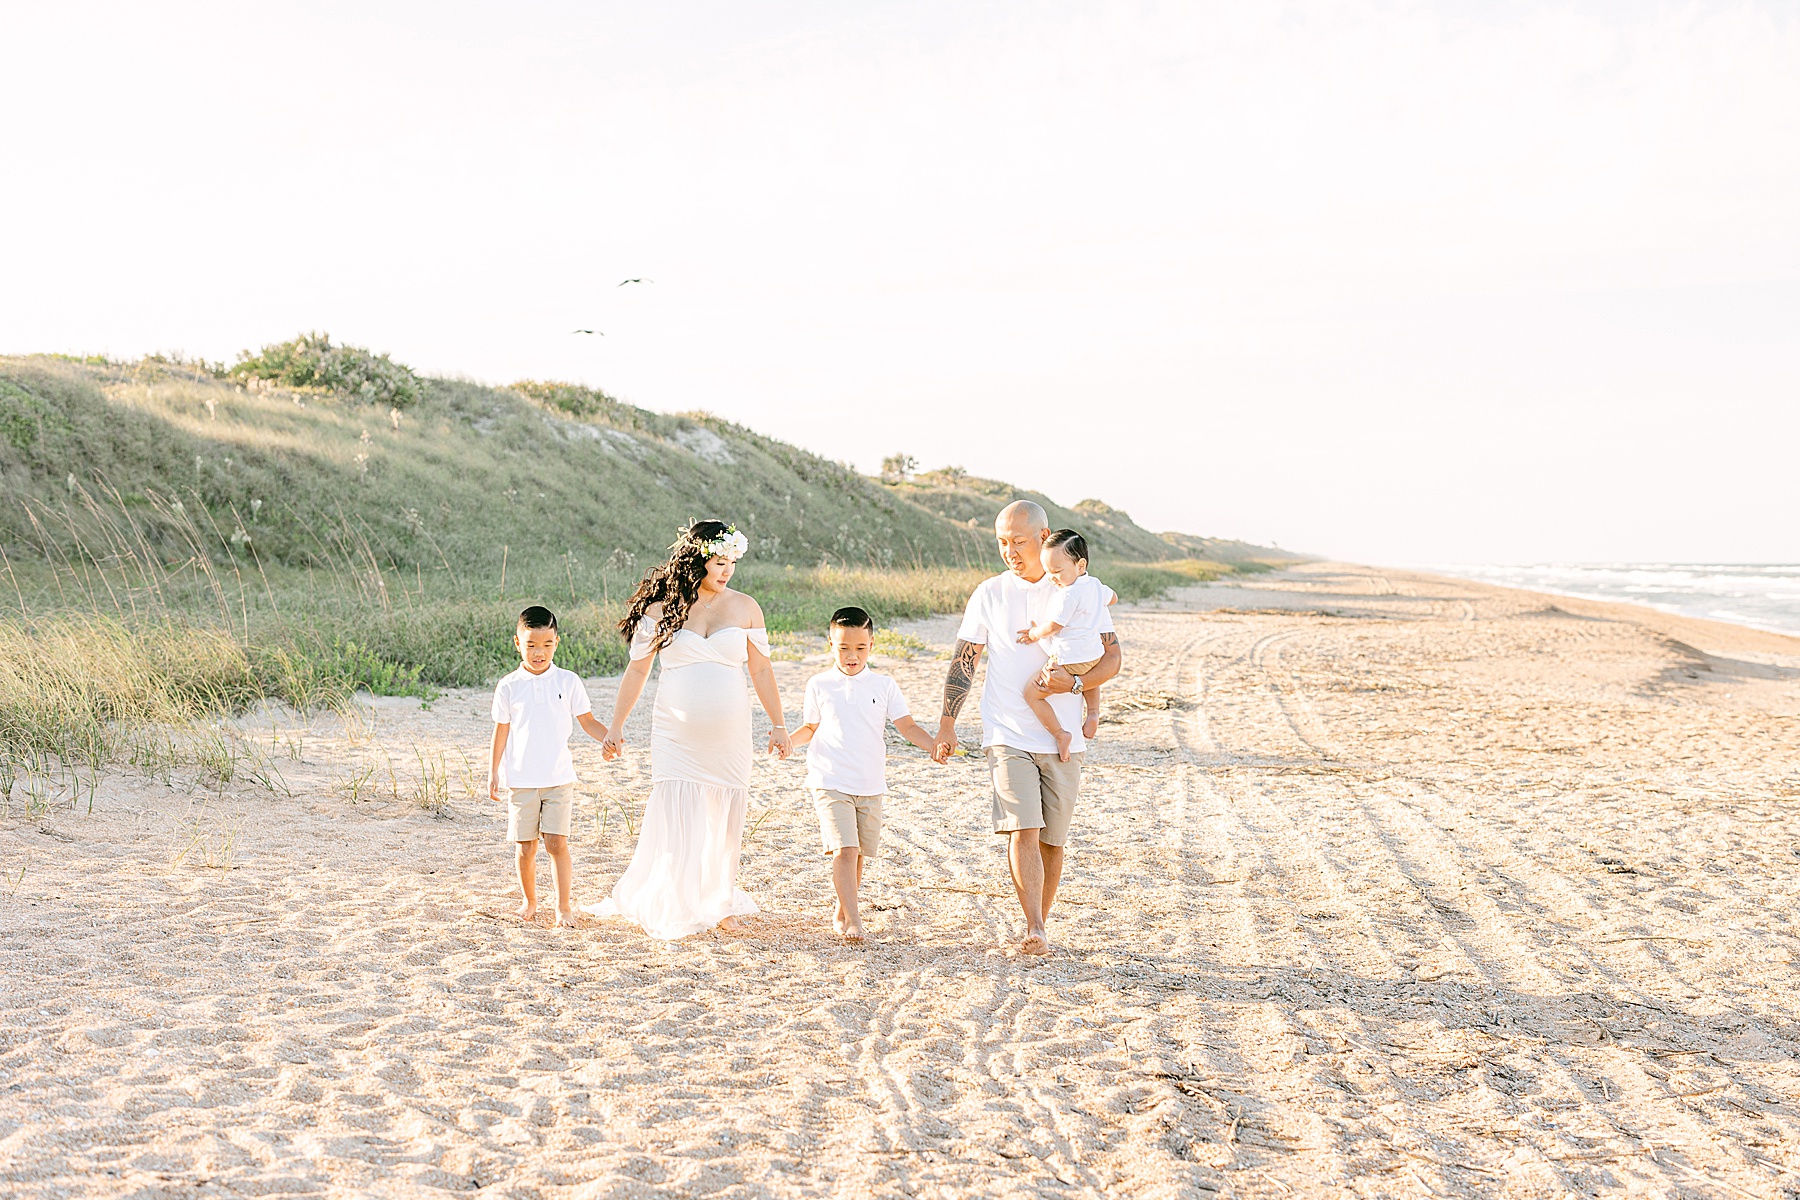 family walking on the beach at sunset holding hands wearing white